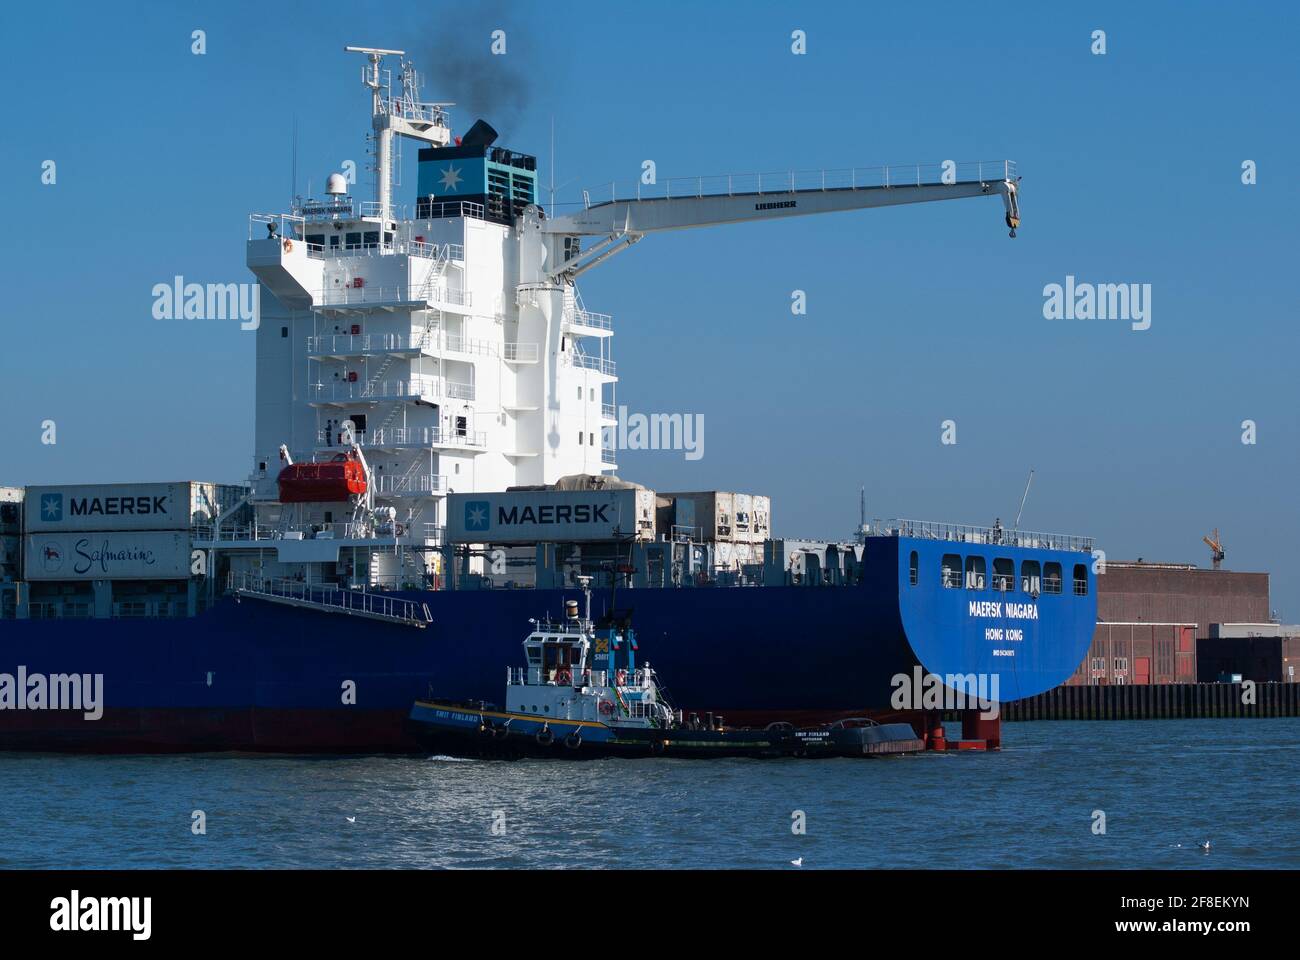 ROTTERDAM, NETHERLANDS - Sep 19, 2009: The tug boat Smit Finland is supporting container ship Maersk Niagara into the harbor of Rotterdam. Stock Photo